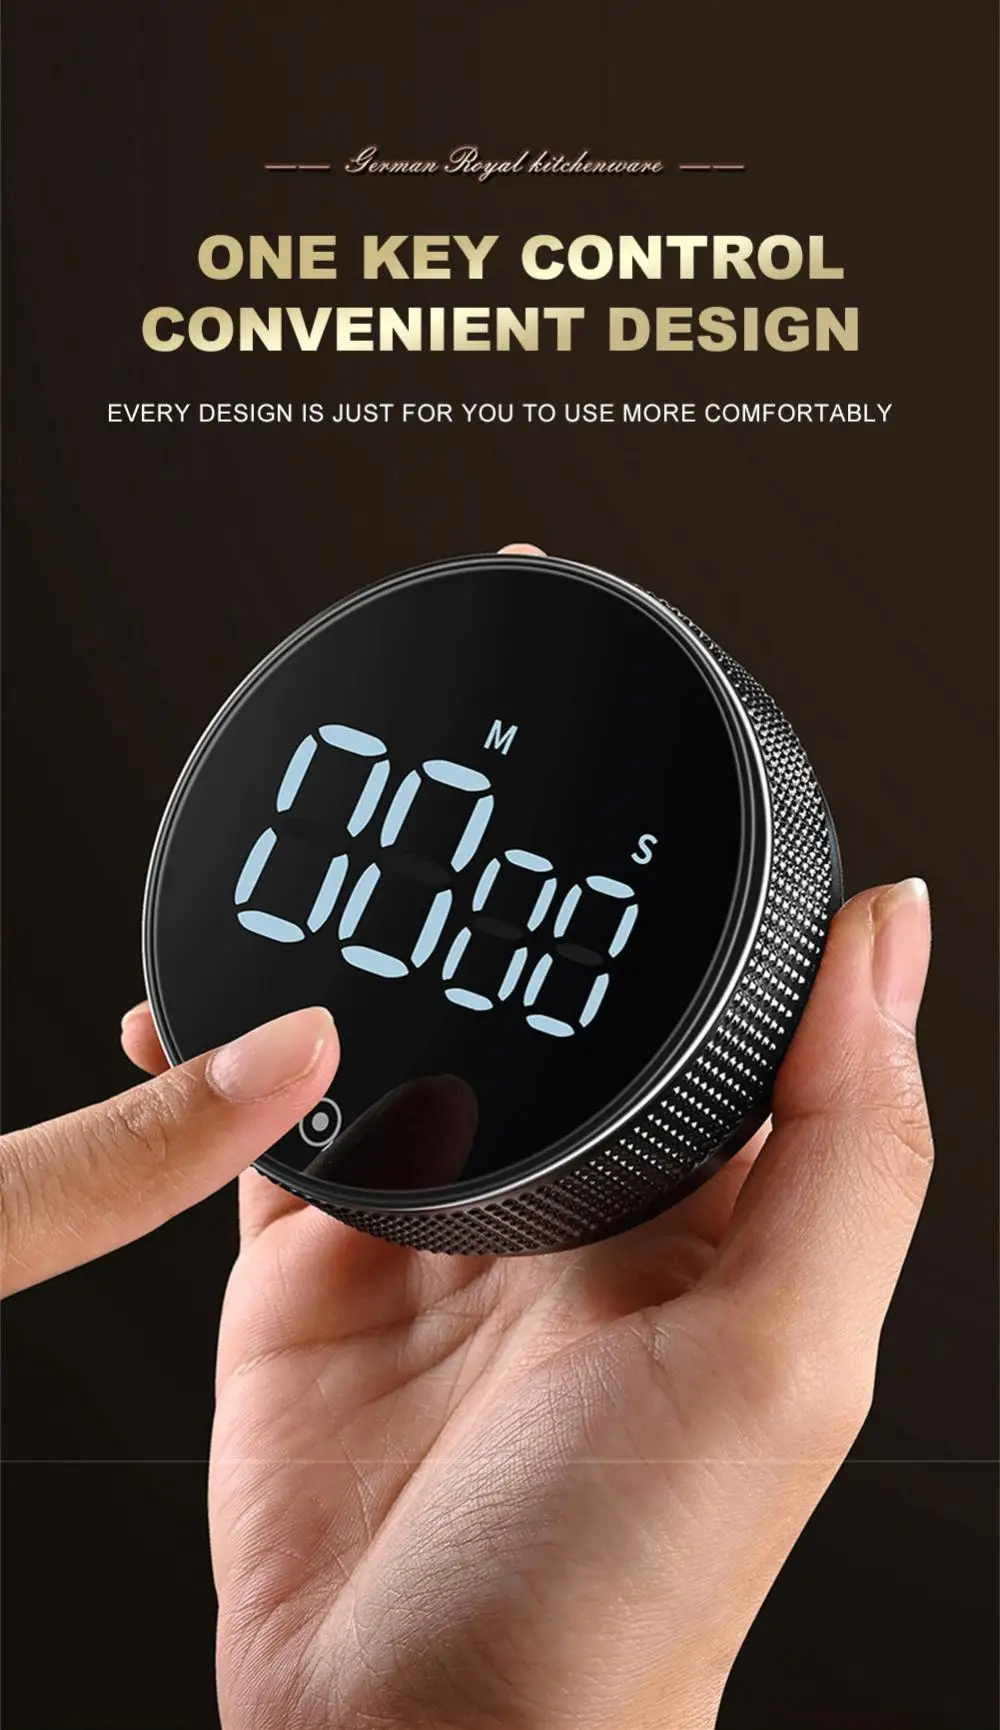 LED Digital Kitchen Timer For Cooking Shower Study Stopwatch Alarm Clock Magnetic Electronic Cooking Countdown Time Timer New